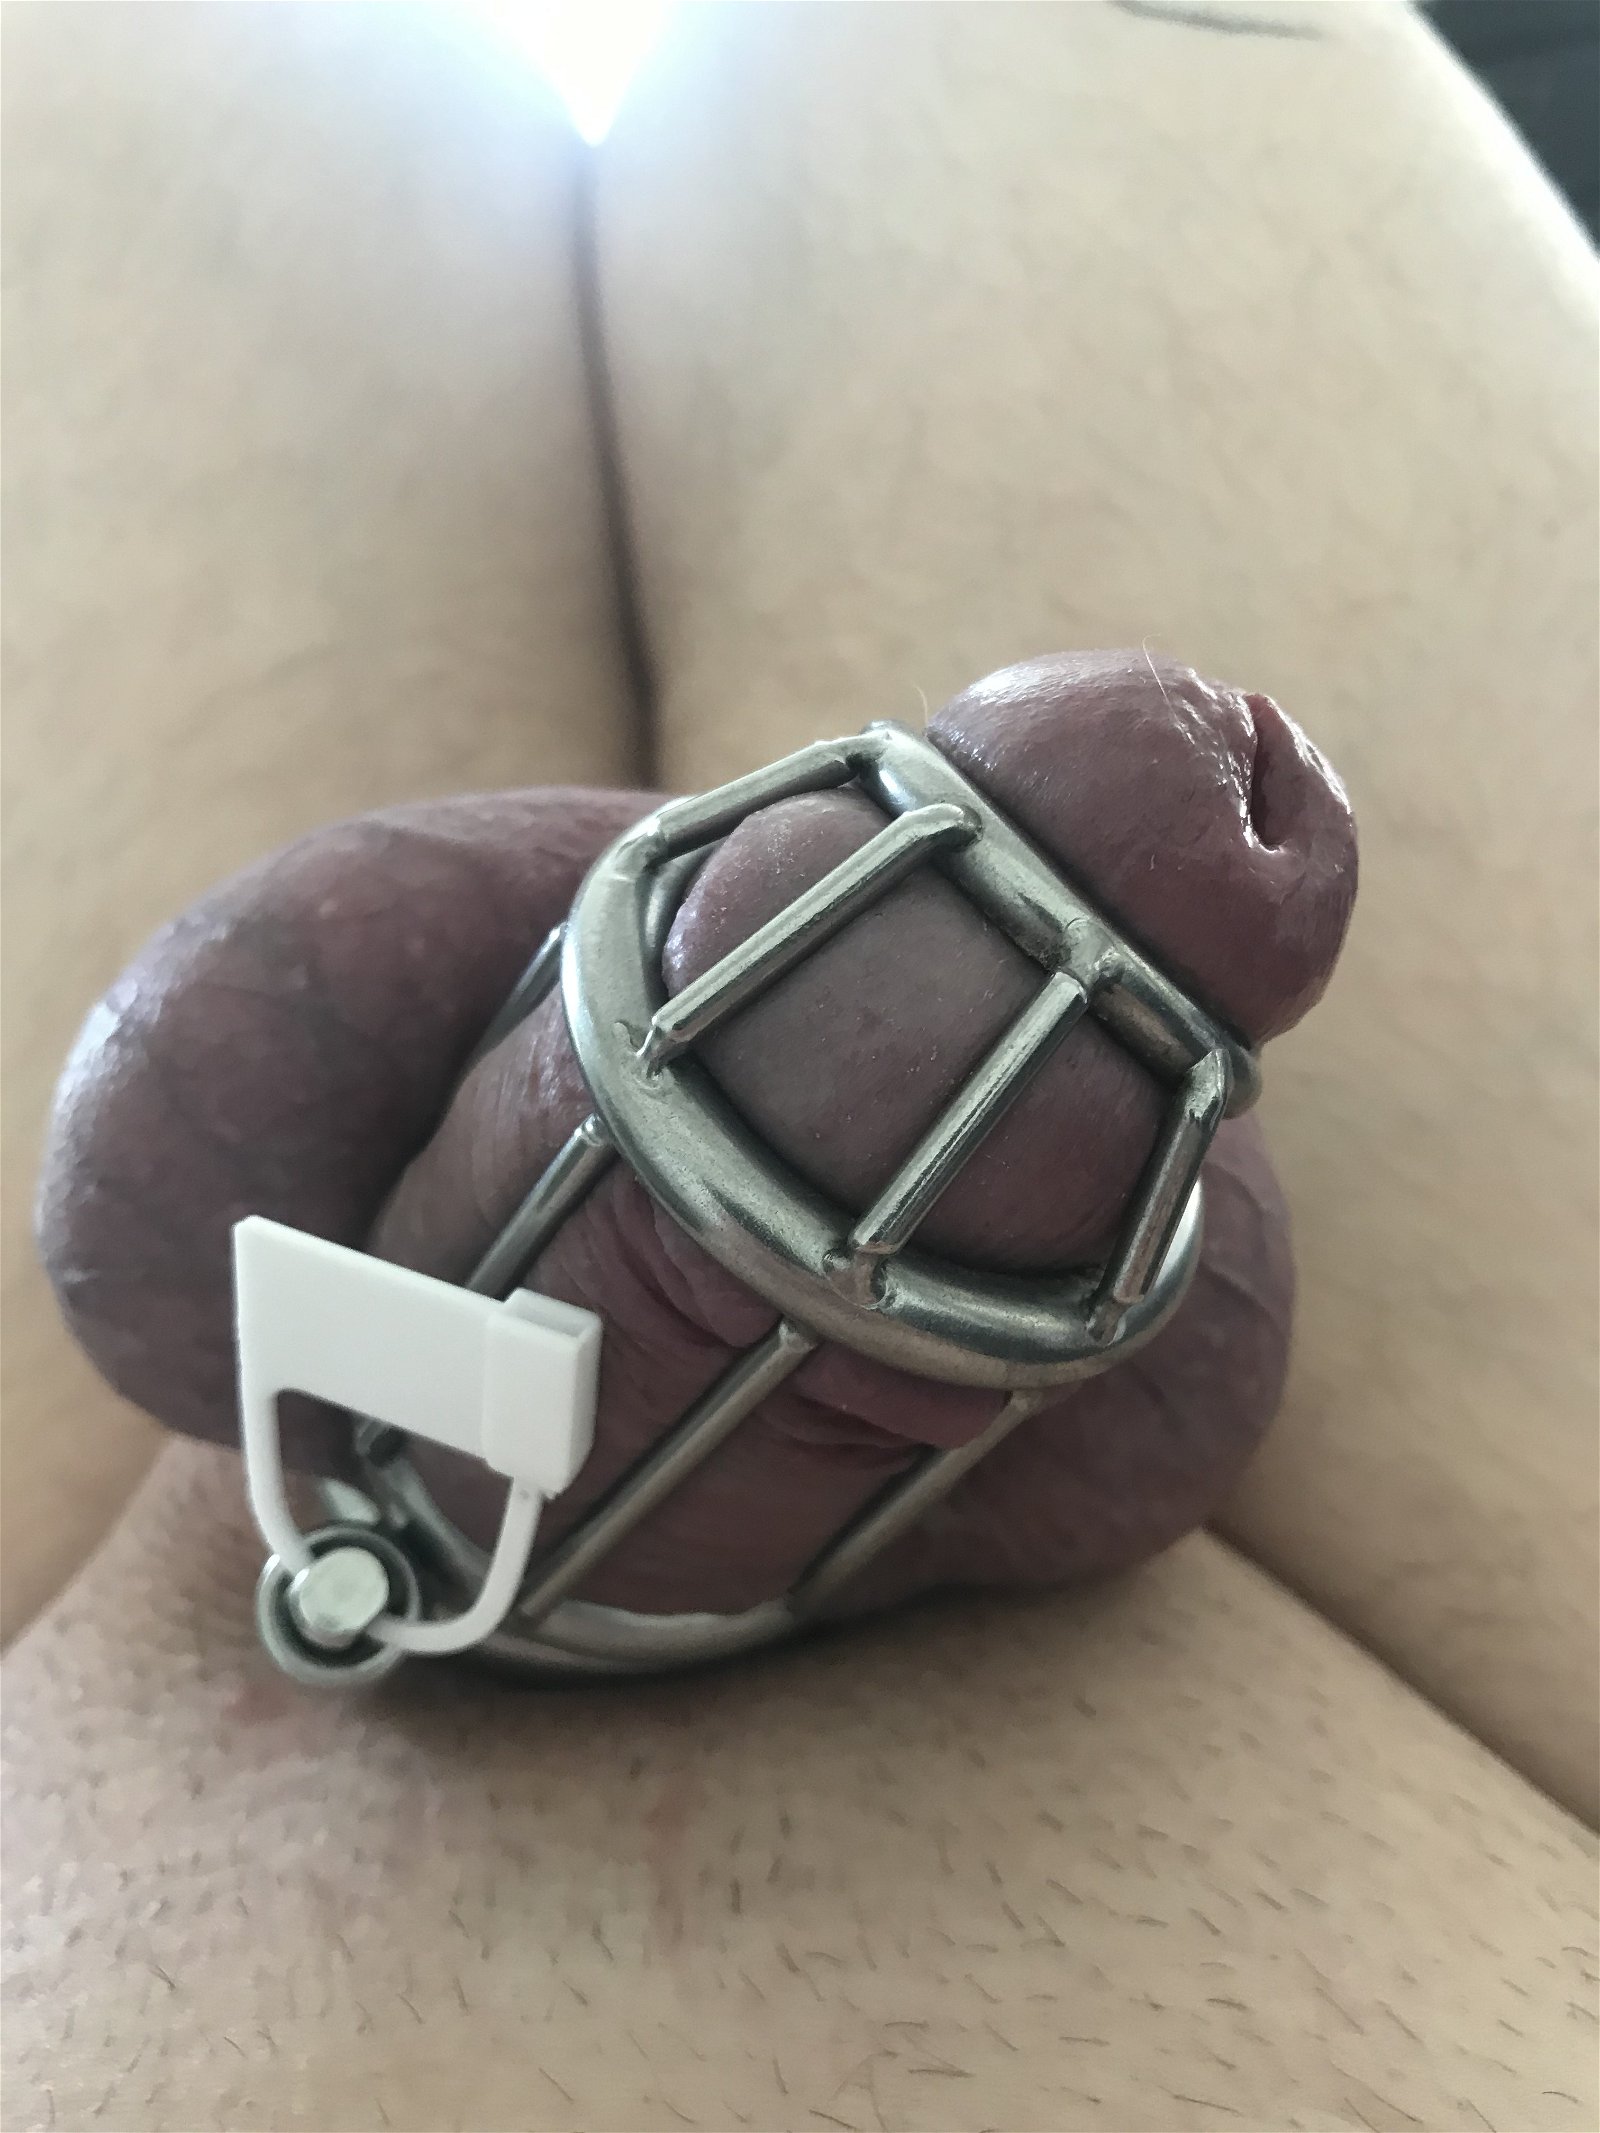 Photo by vuduj with the username @vuduj, who is a verified user,  May 27, 2019 at 12:49 PM. The post is about the topic Chastity and the text says 'Only one week in...the pain, the pleasure!'